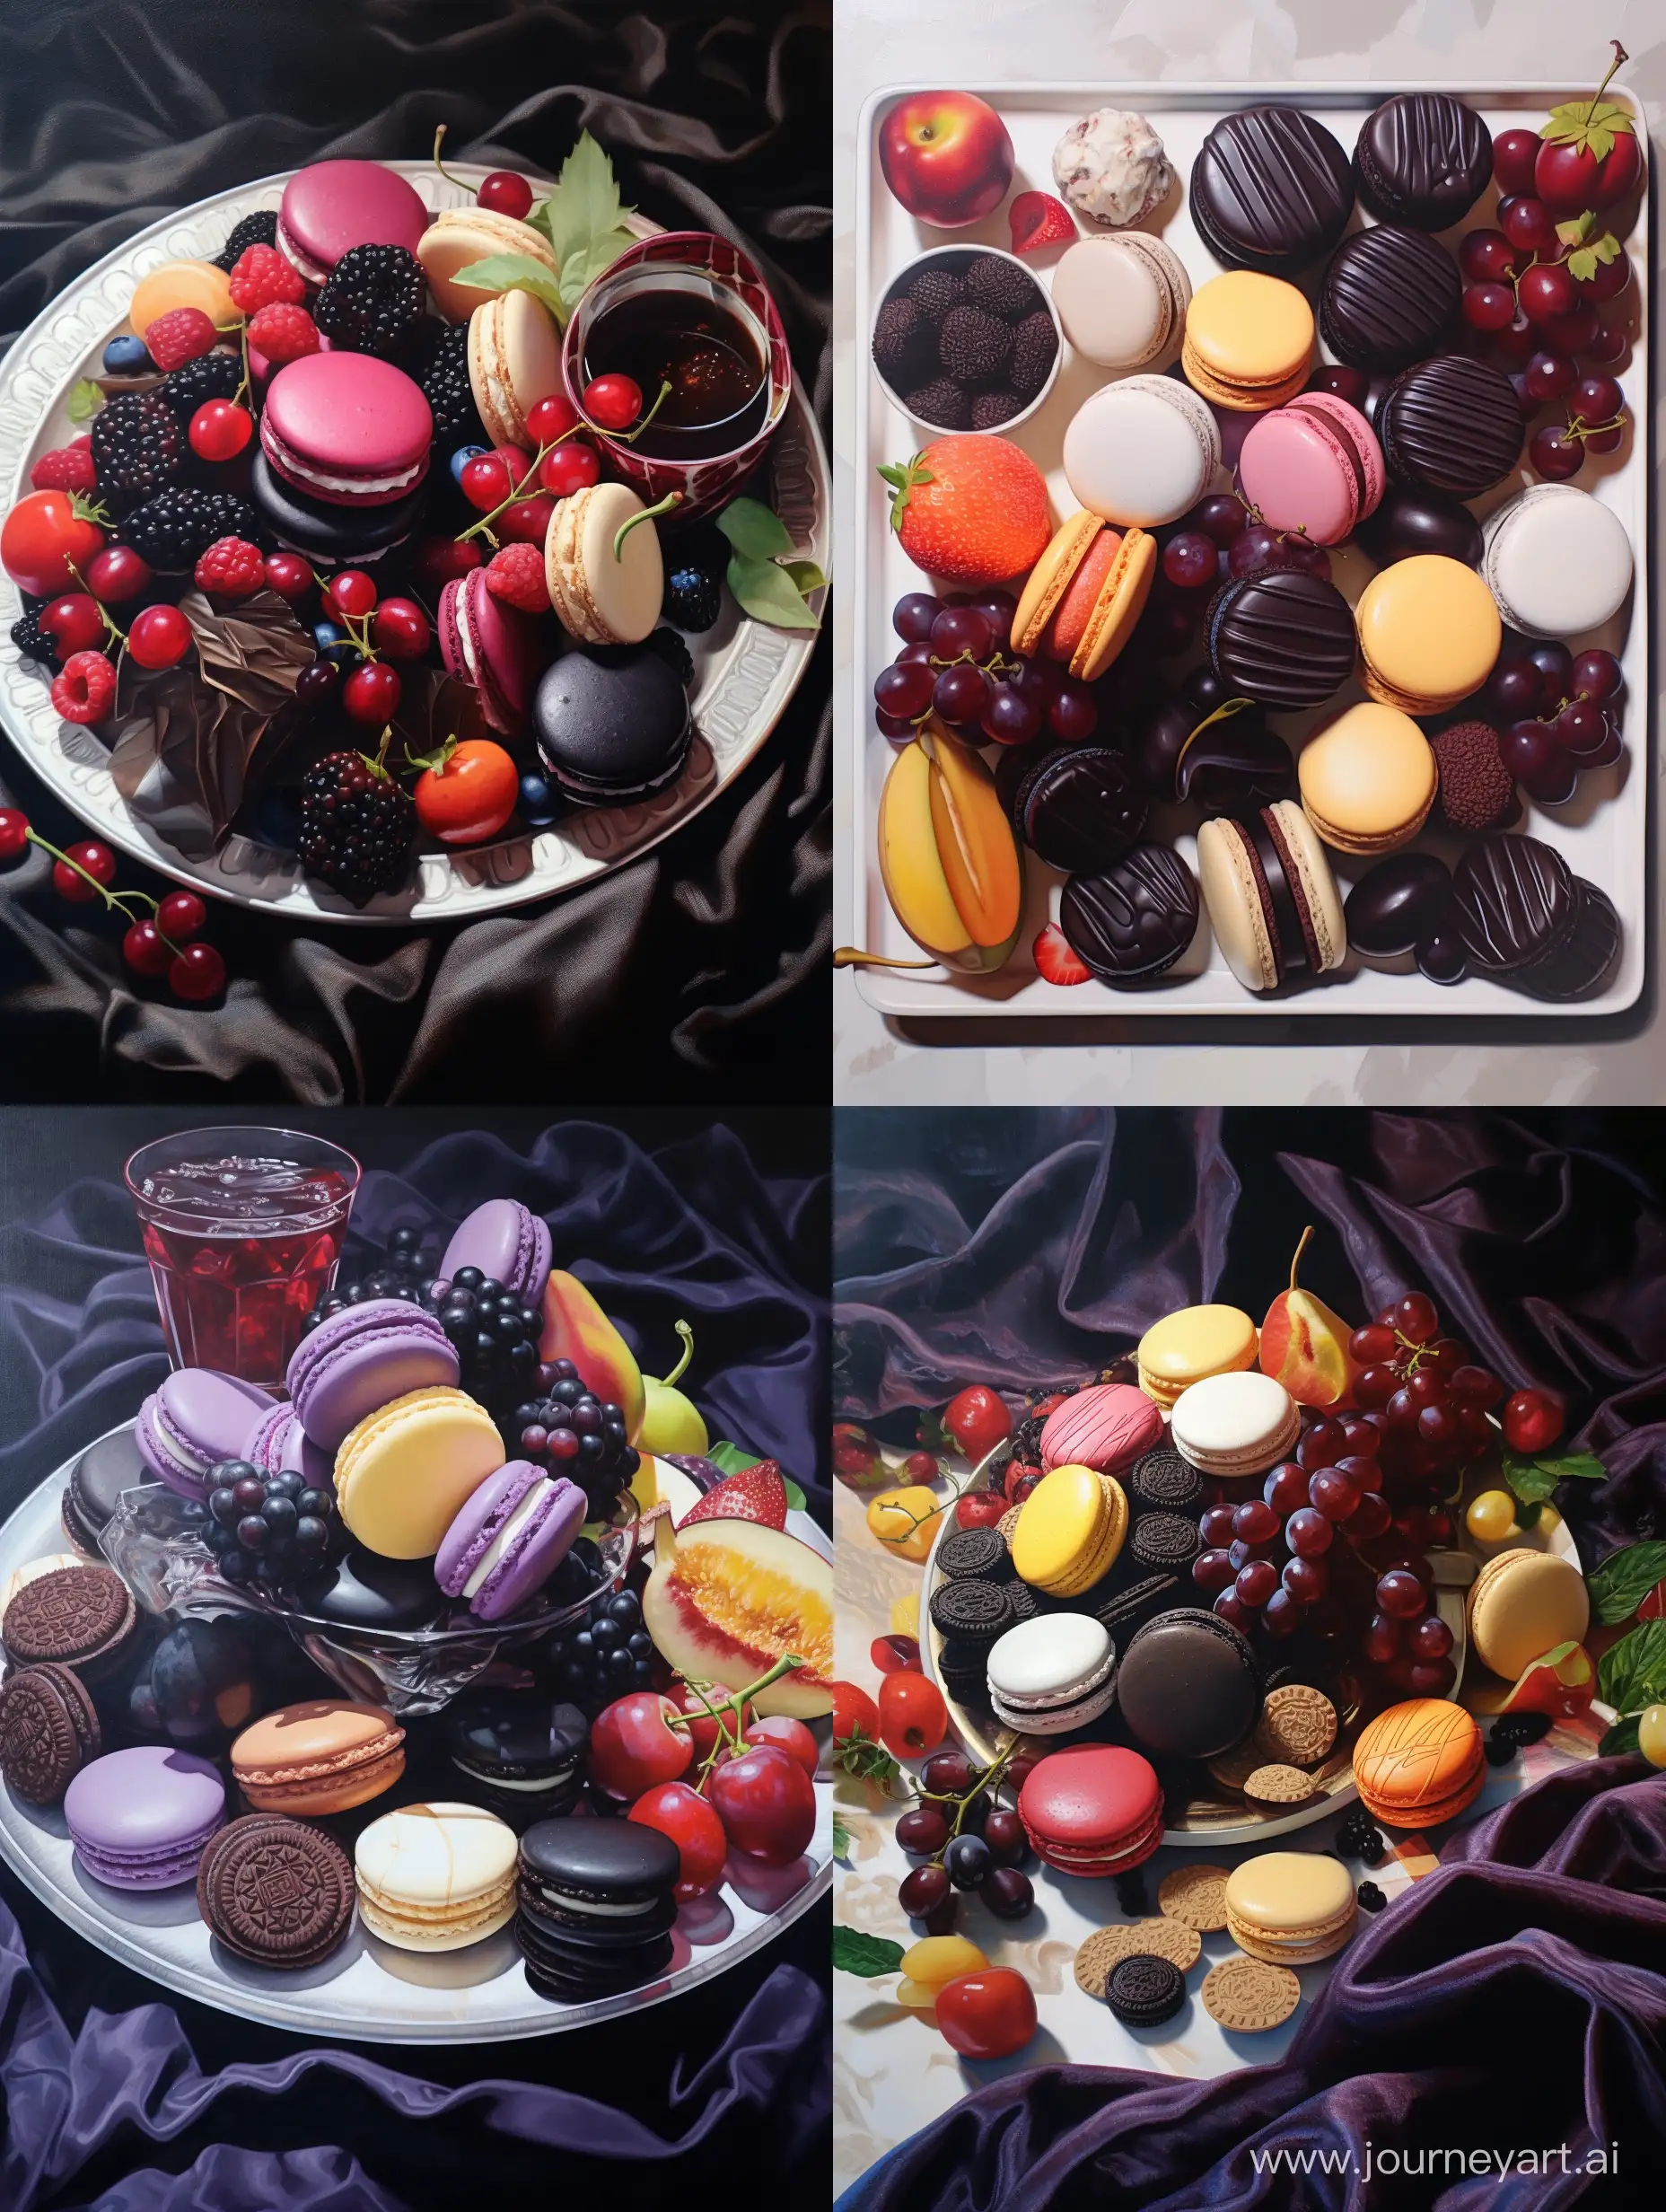 Delicious-Macaroon-Assortment-on-Bright-Tray